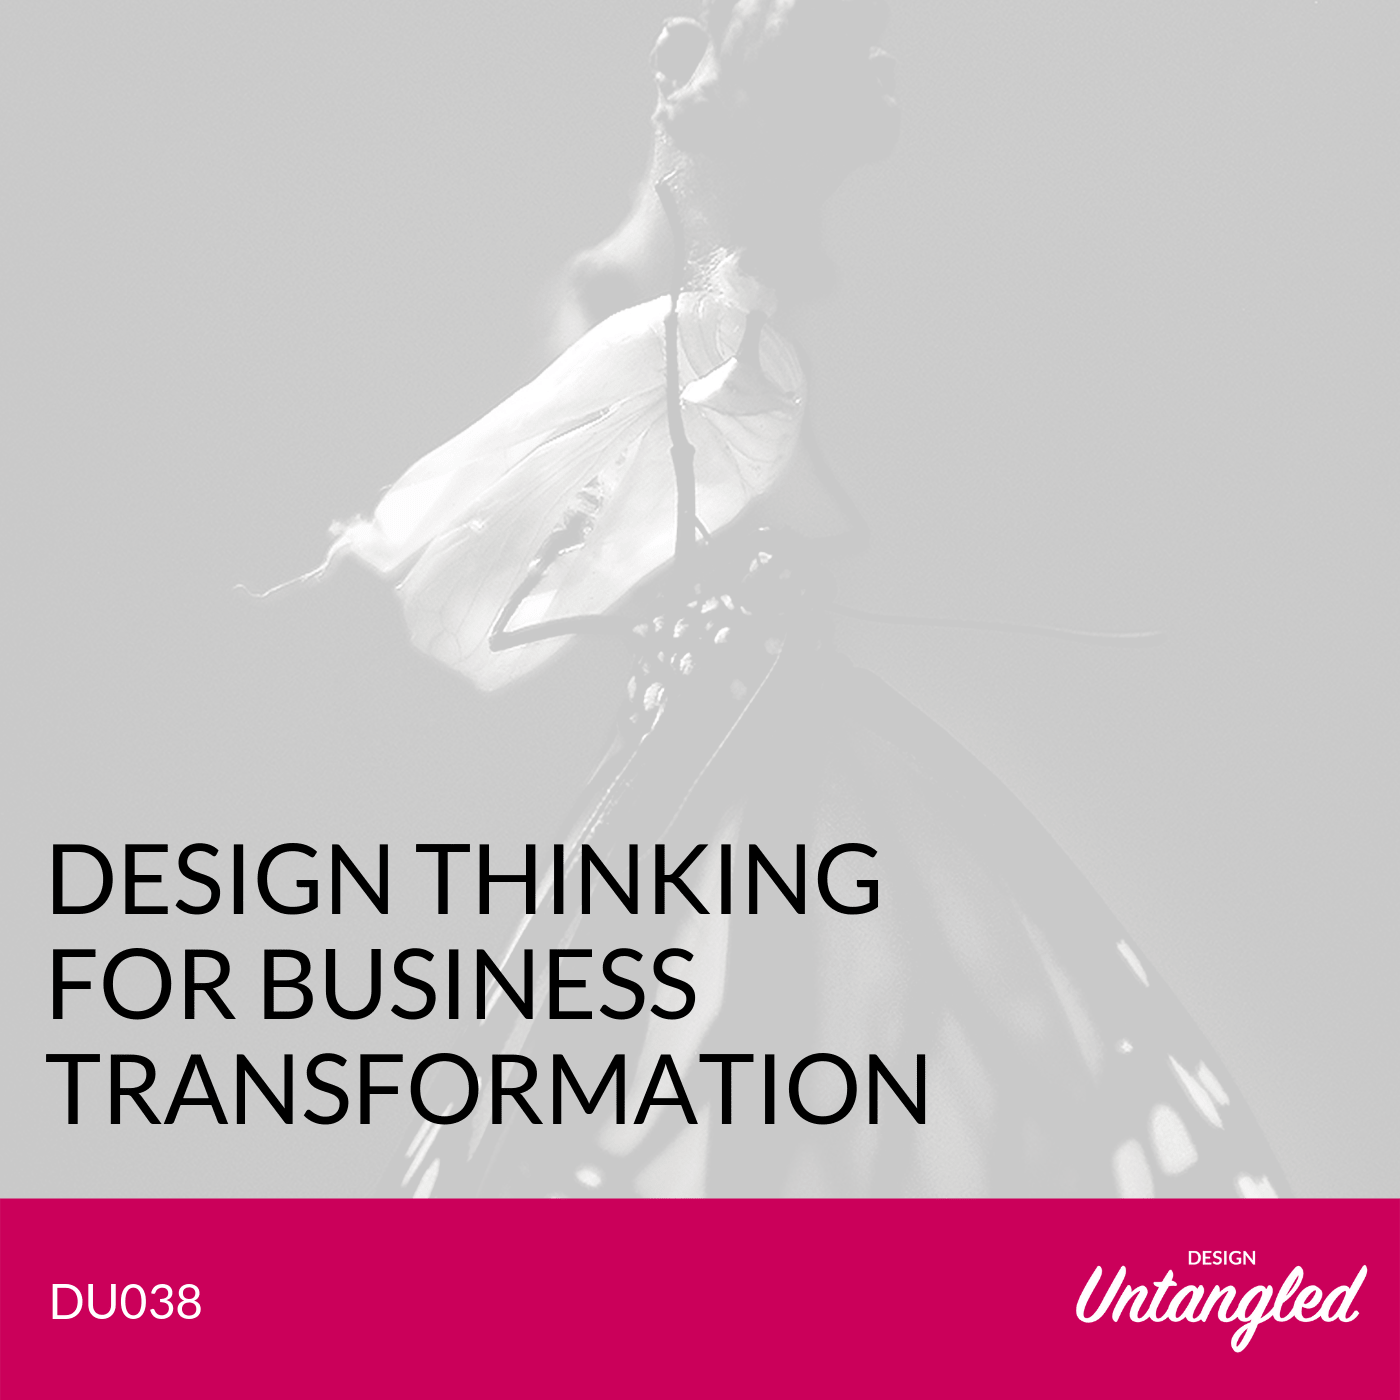 DU038 – Design Thinking for Business Transformation